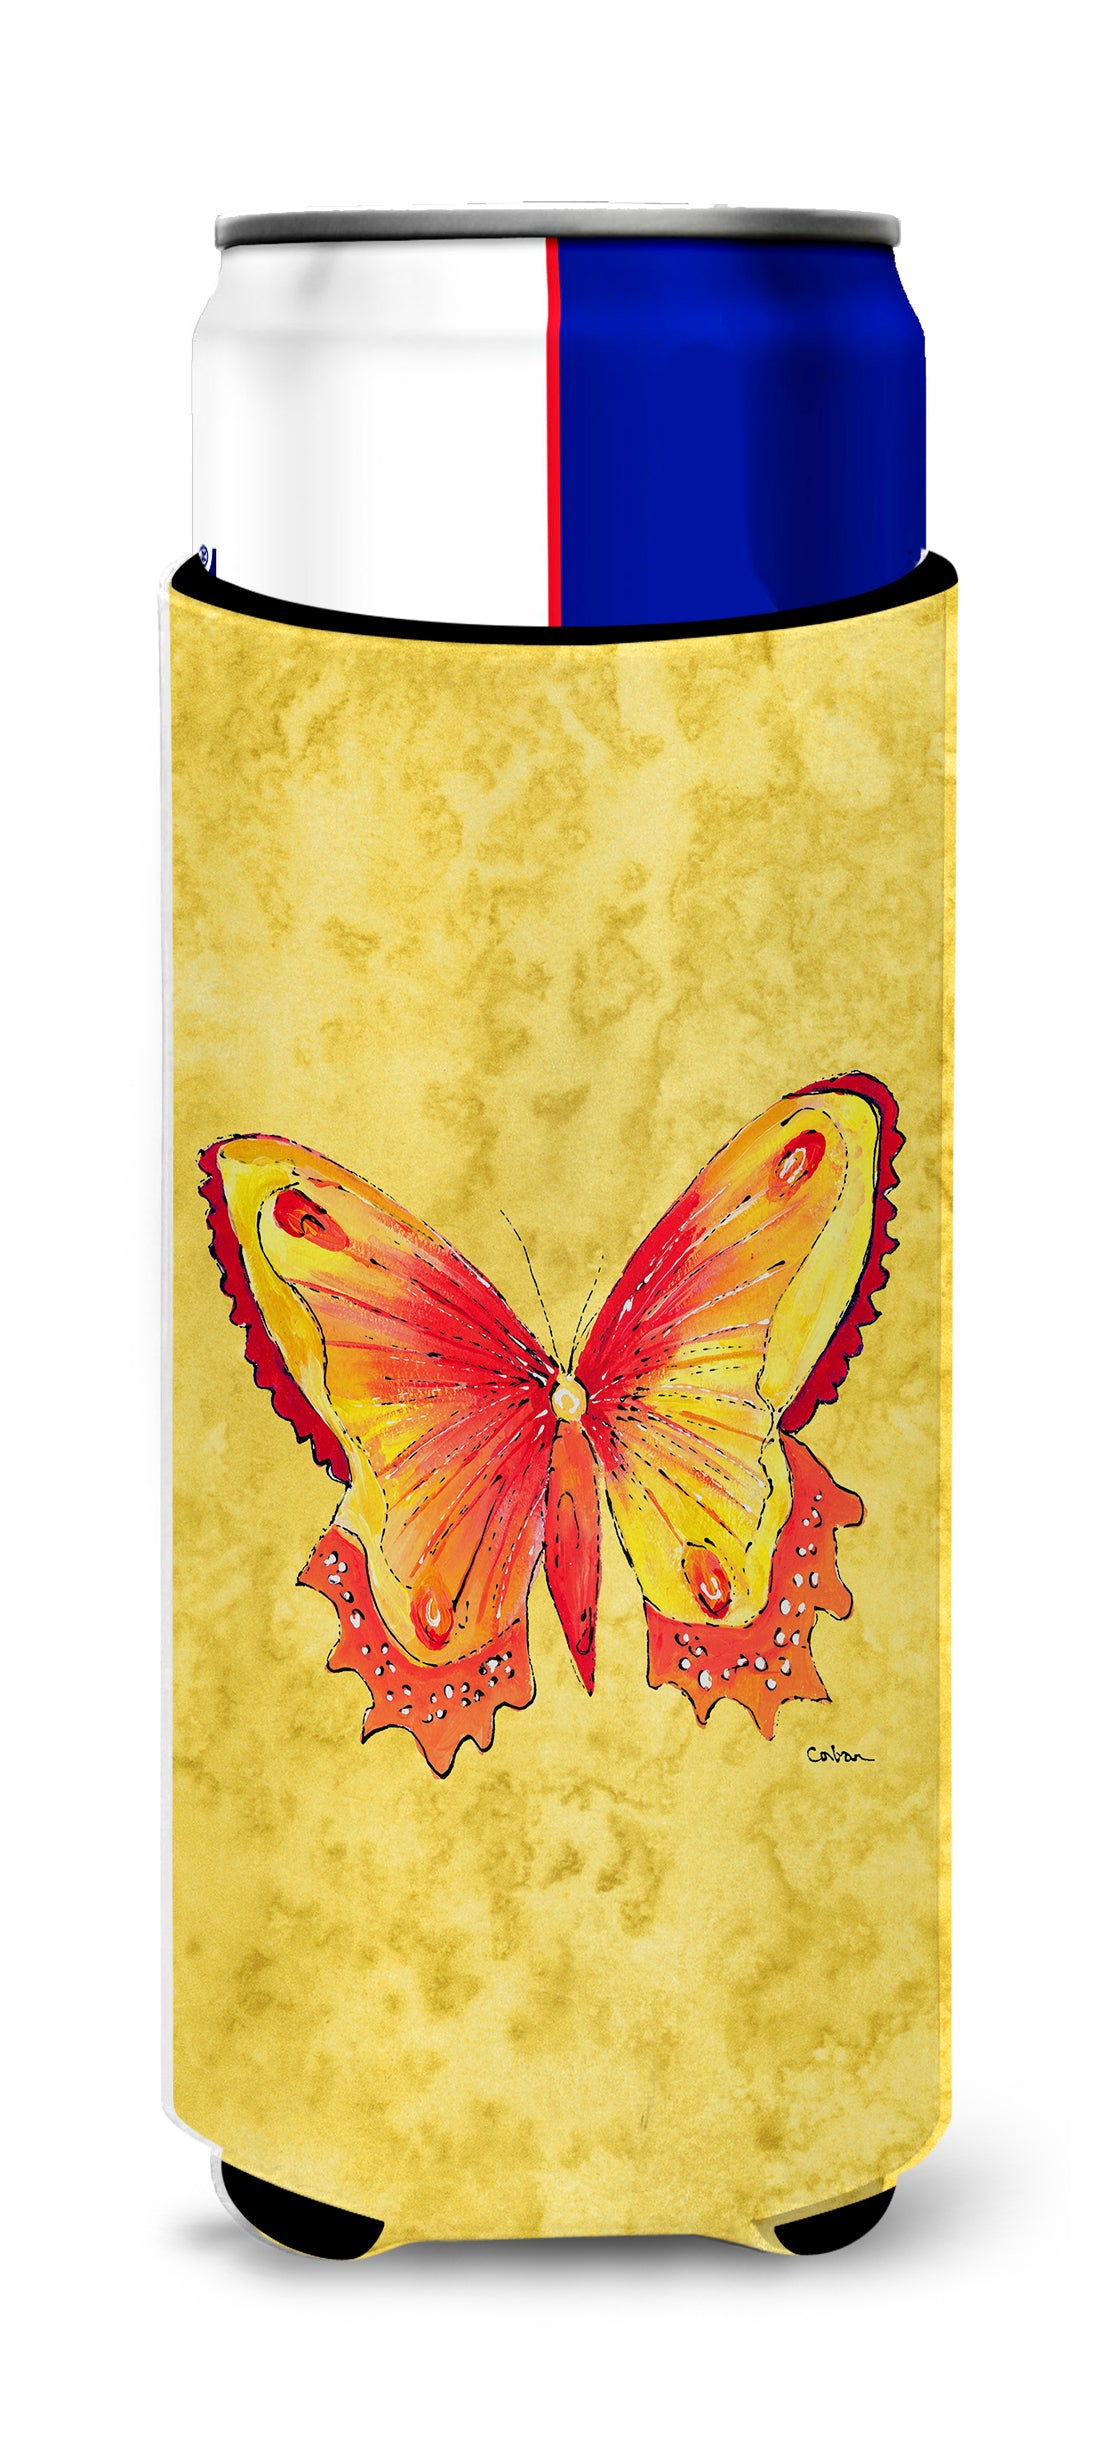 Butterfly on Yellow Ultra Beverage Insulators for slim cans 8857MUK